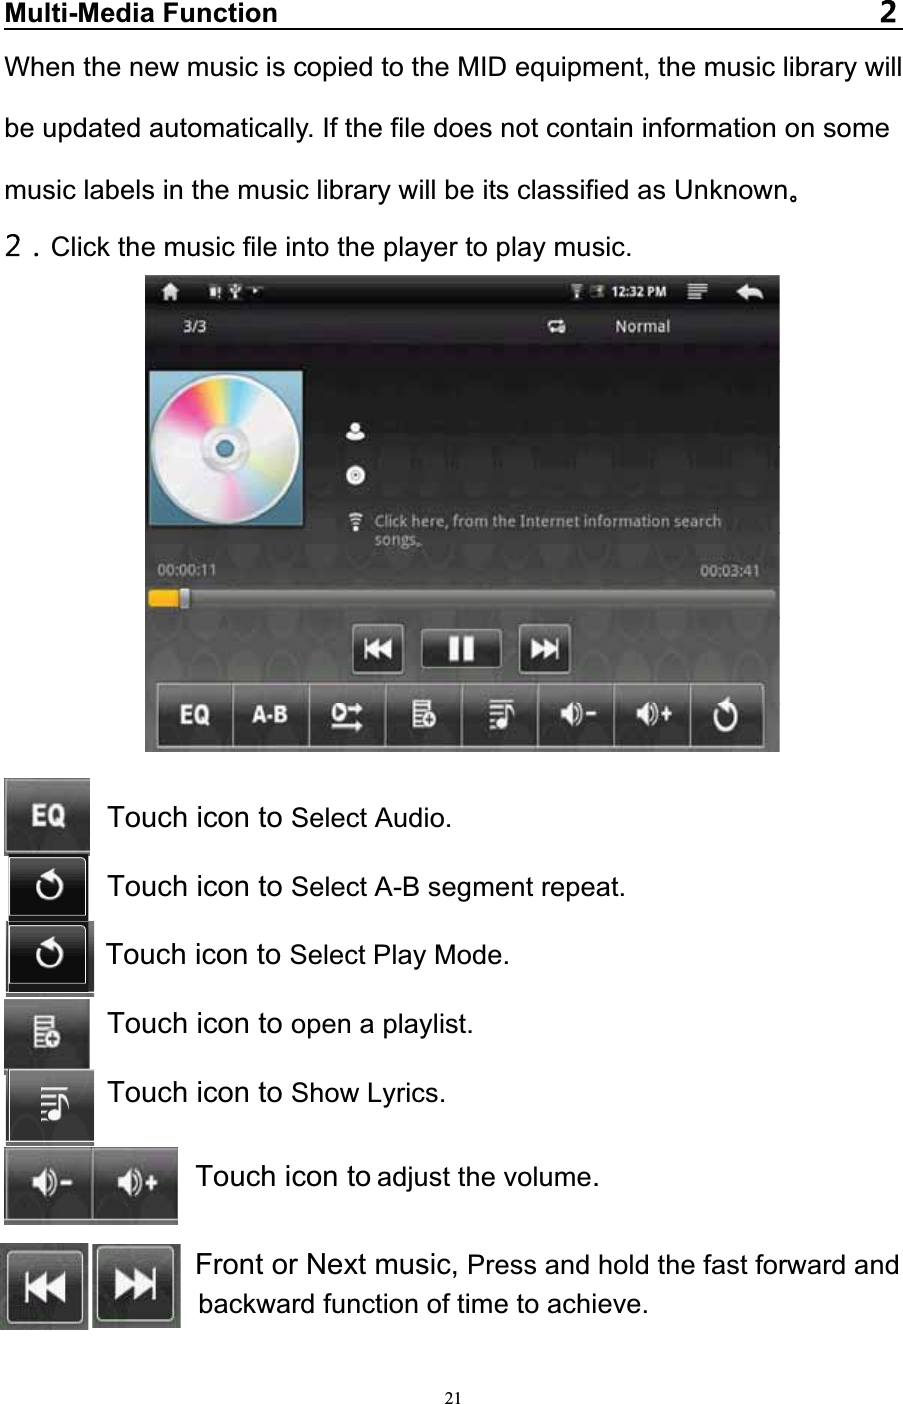   21Multi-Media FunctionWhen the new music is copied to the MID equipment, the music library will be updated automatically. If the file does not contain information on some music labels in the music library will be its classified as Unknown  Click the music file into the player to play music.Touch icon to Select Audio. Touch icon to Select A-B segment repeat. Touch icon to Select Play Mode. Touch icon to open a playlist. Touch icon to Show Lyrics. Touch icon to adjust the volume. Front or Next music, Press and hold the fast forward and   backward function of time to achieve.